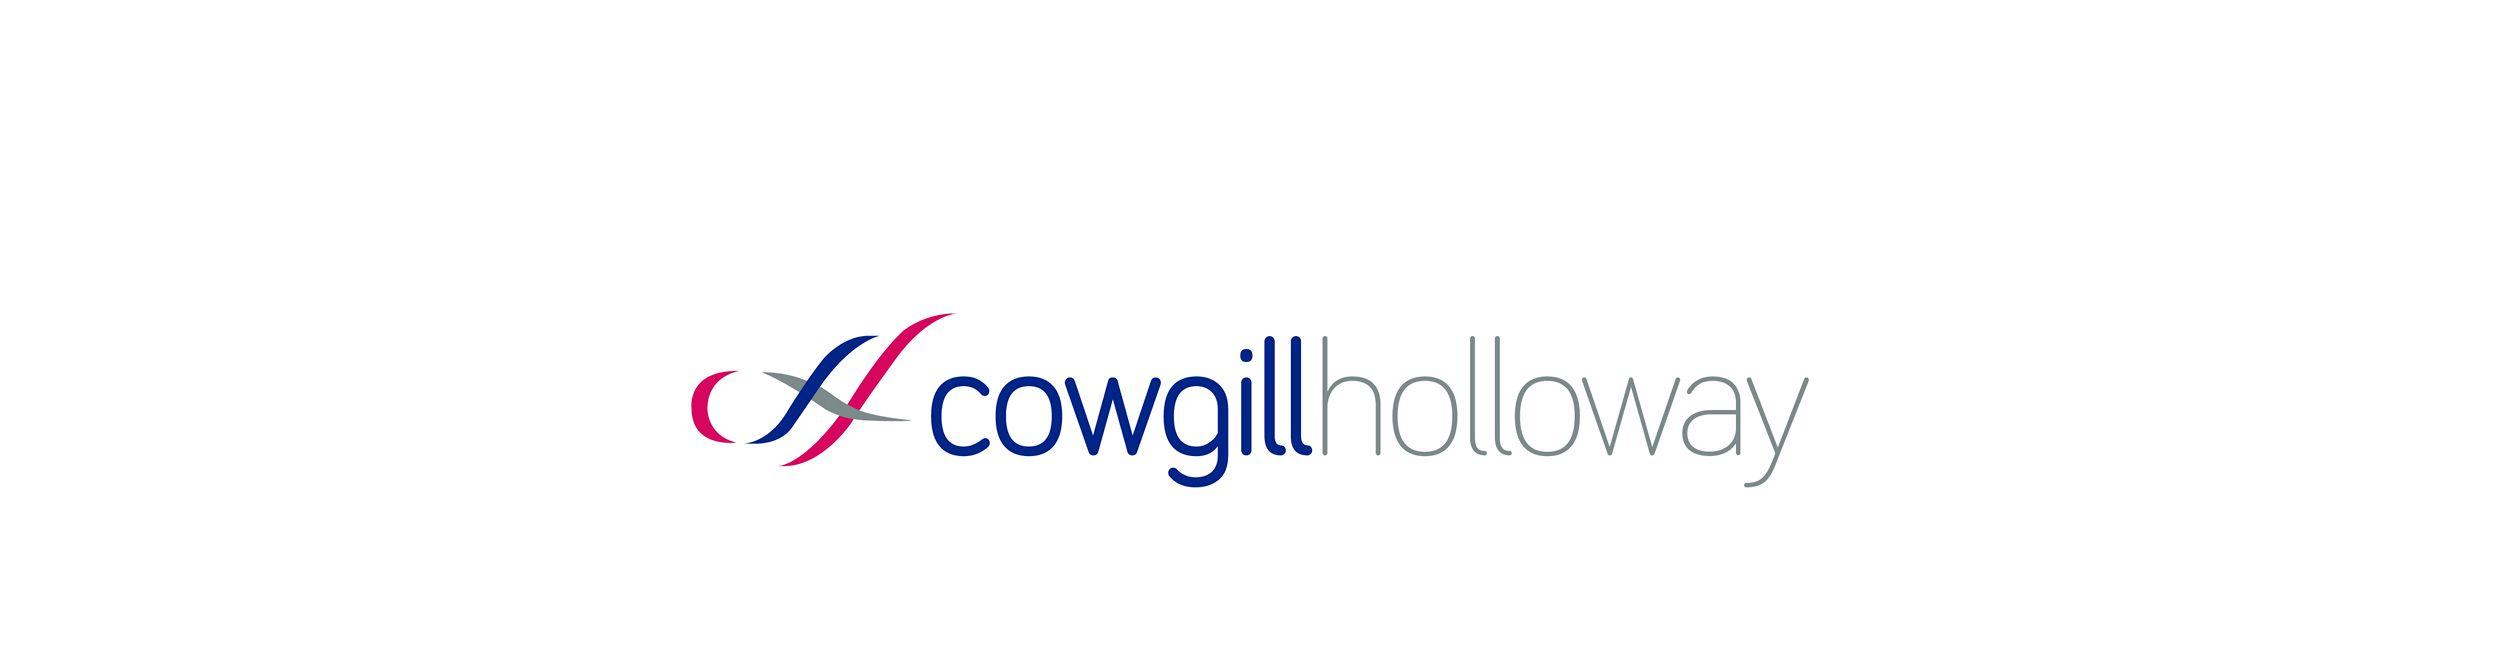 Holloway Logo - Cowgill Holloway weekly in The Campus - The Sharp Project